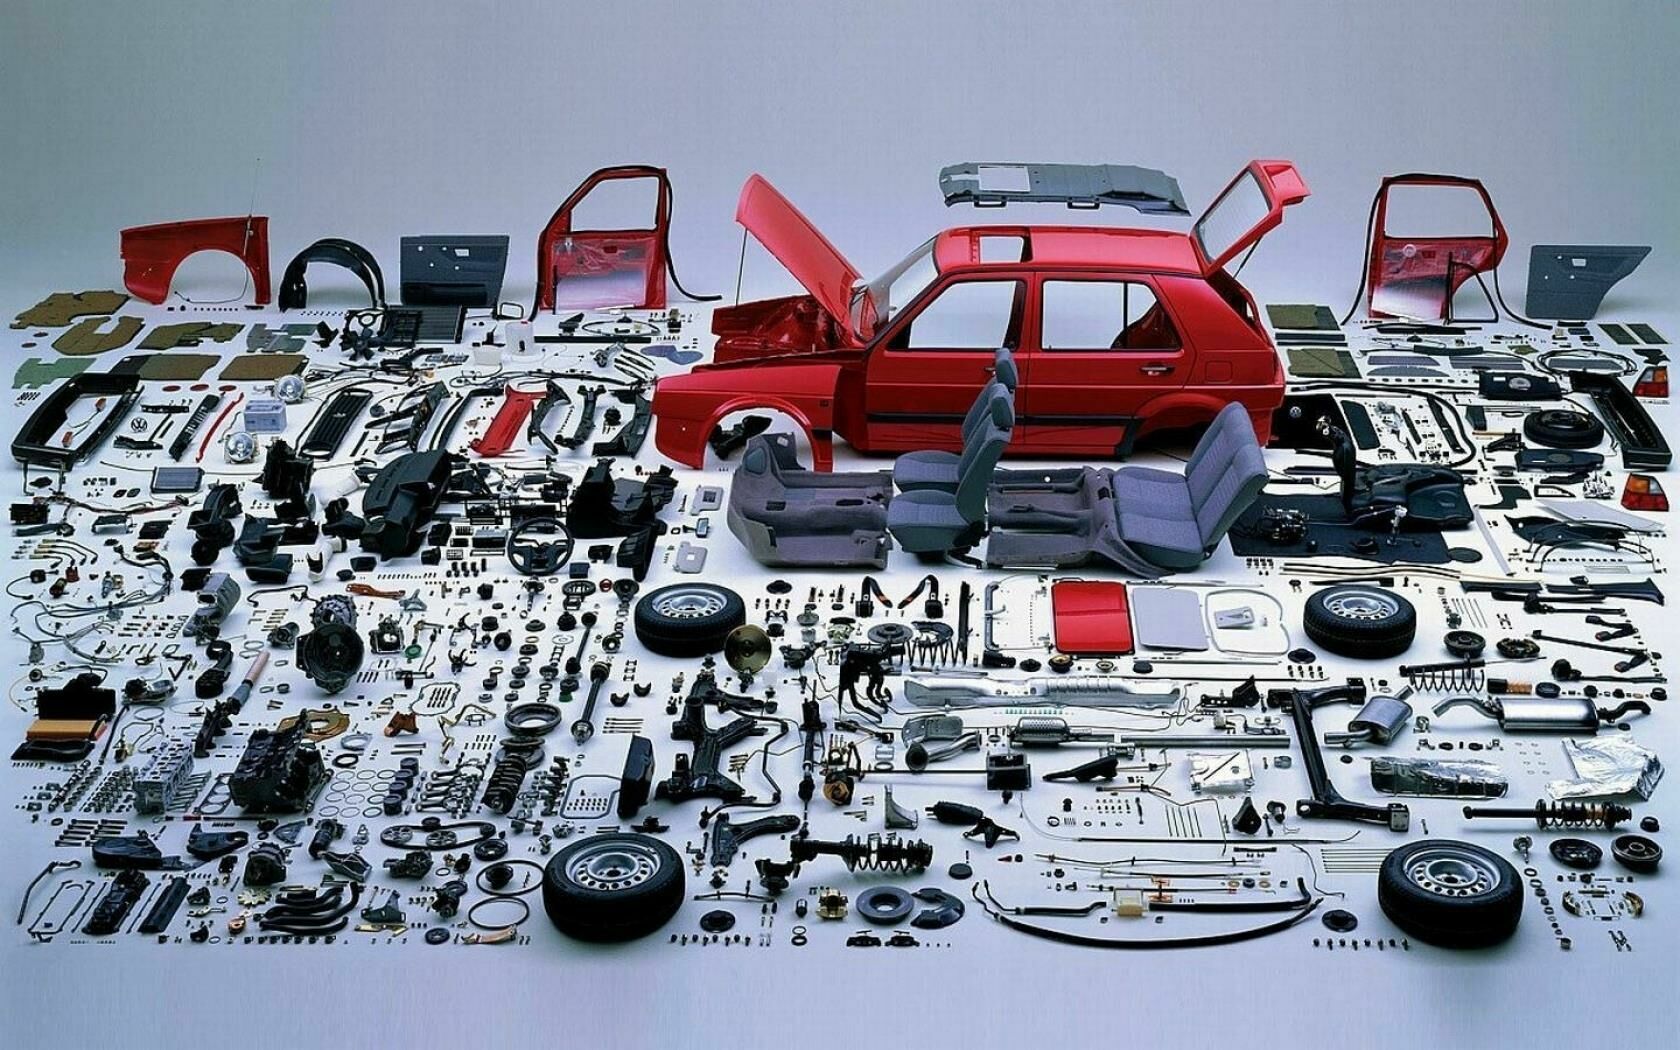 “There are no such spare car parts in the country…” Motorists face problems with repairs